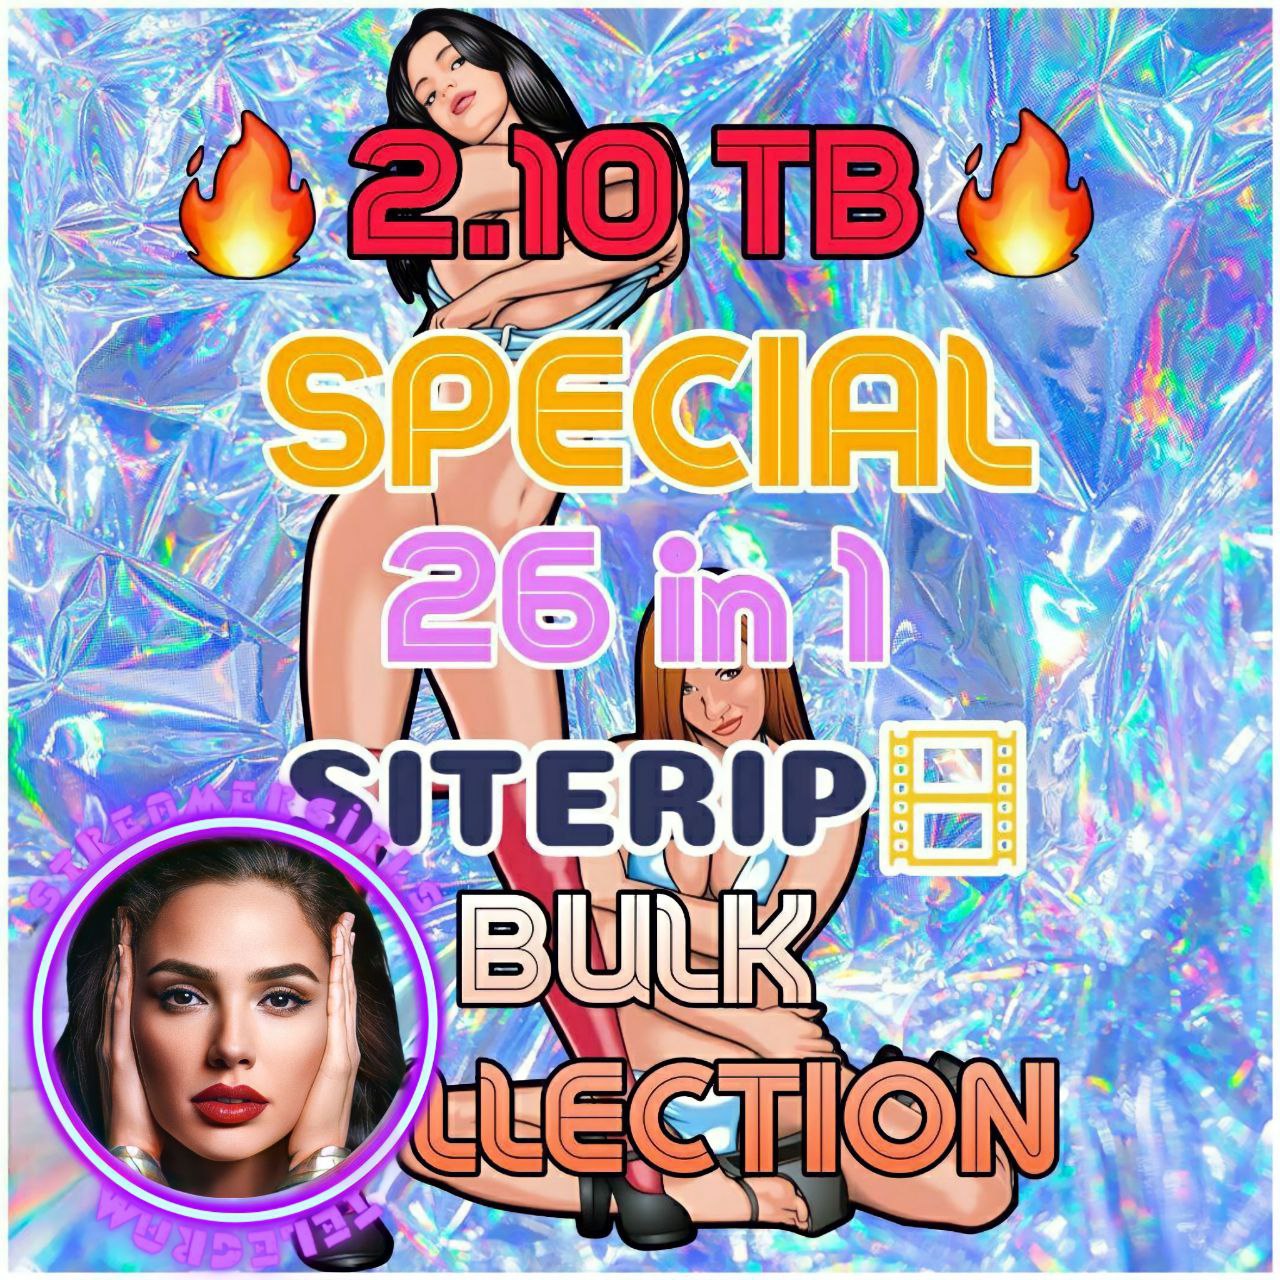 2.10 TB 26 in 1 SPECIAL COLLECT!ON